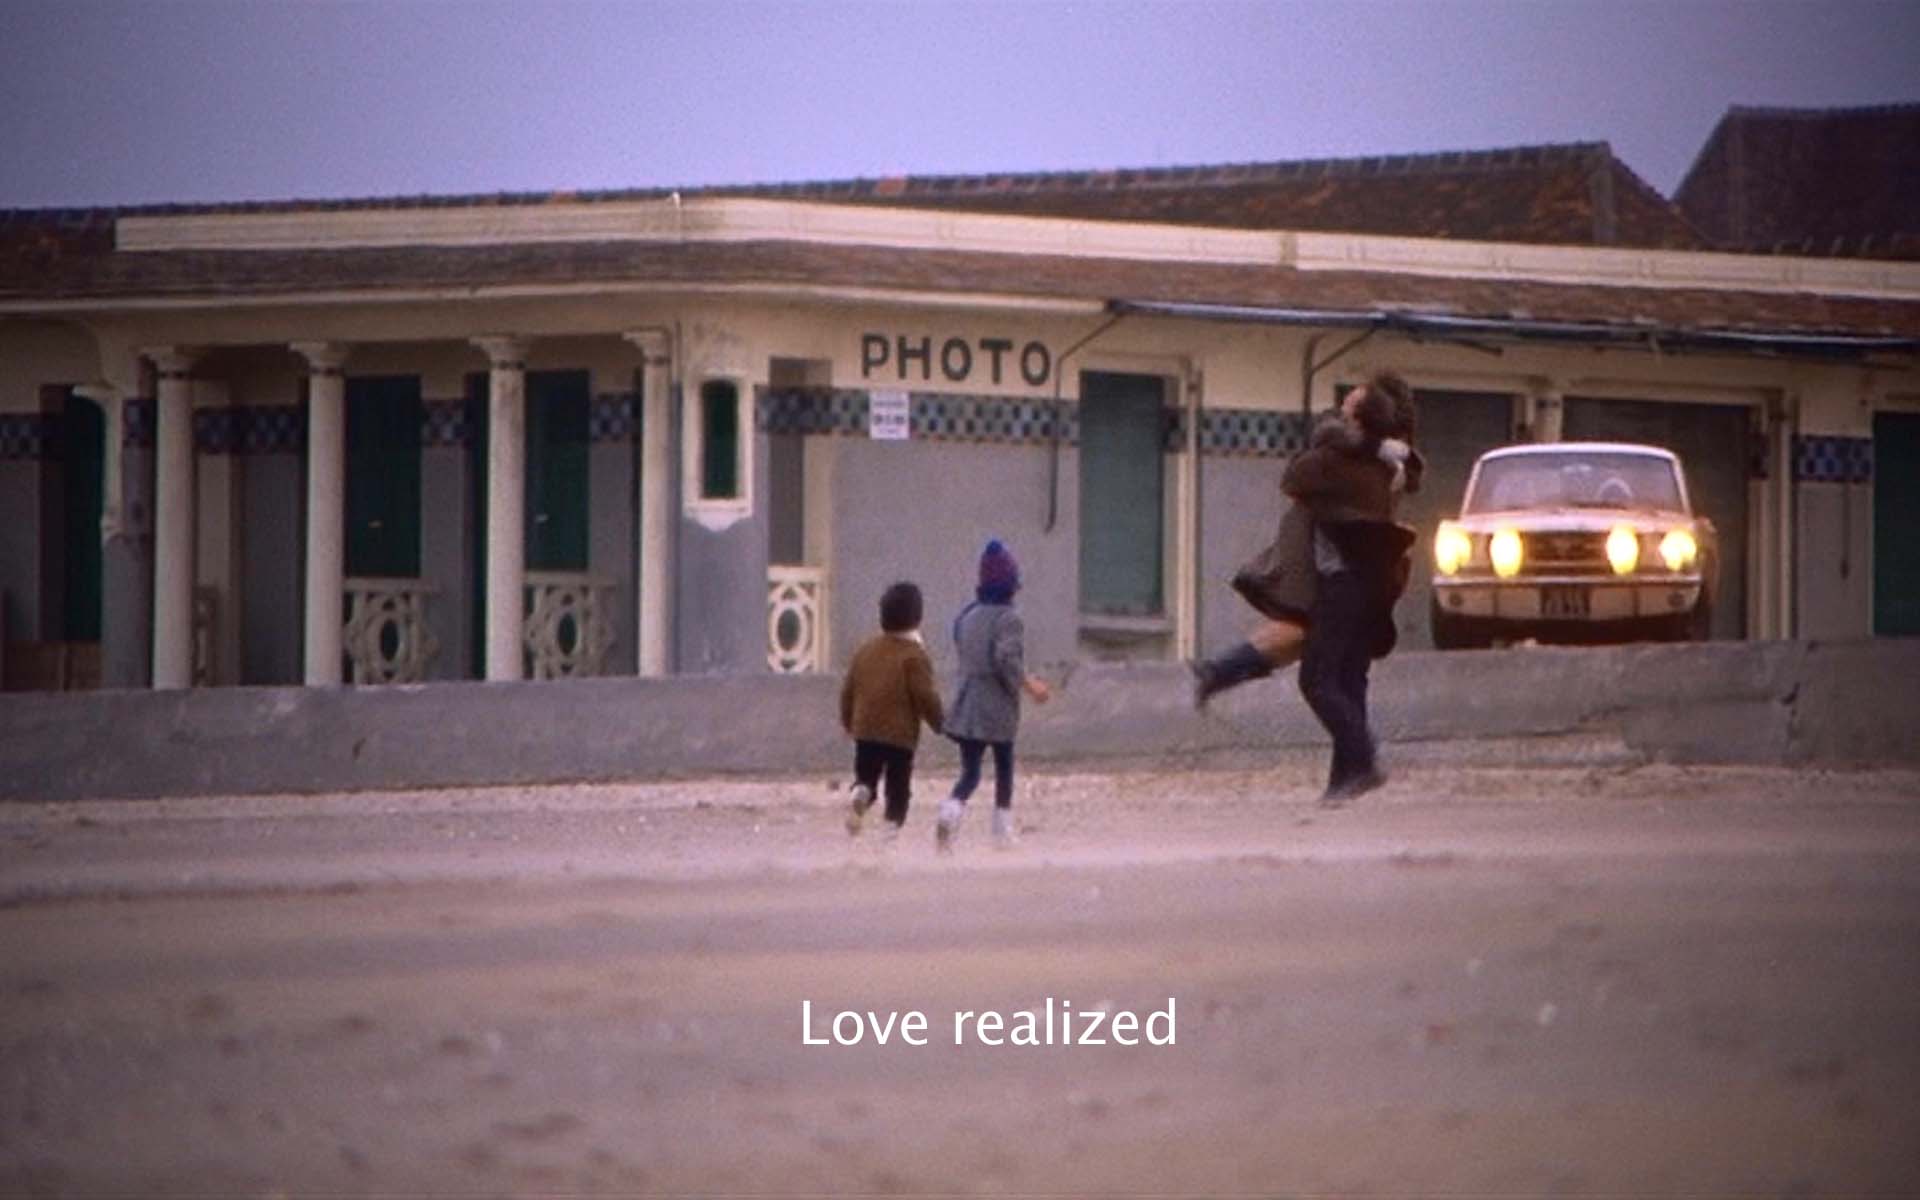 Love realized